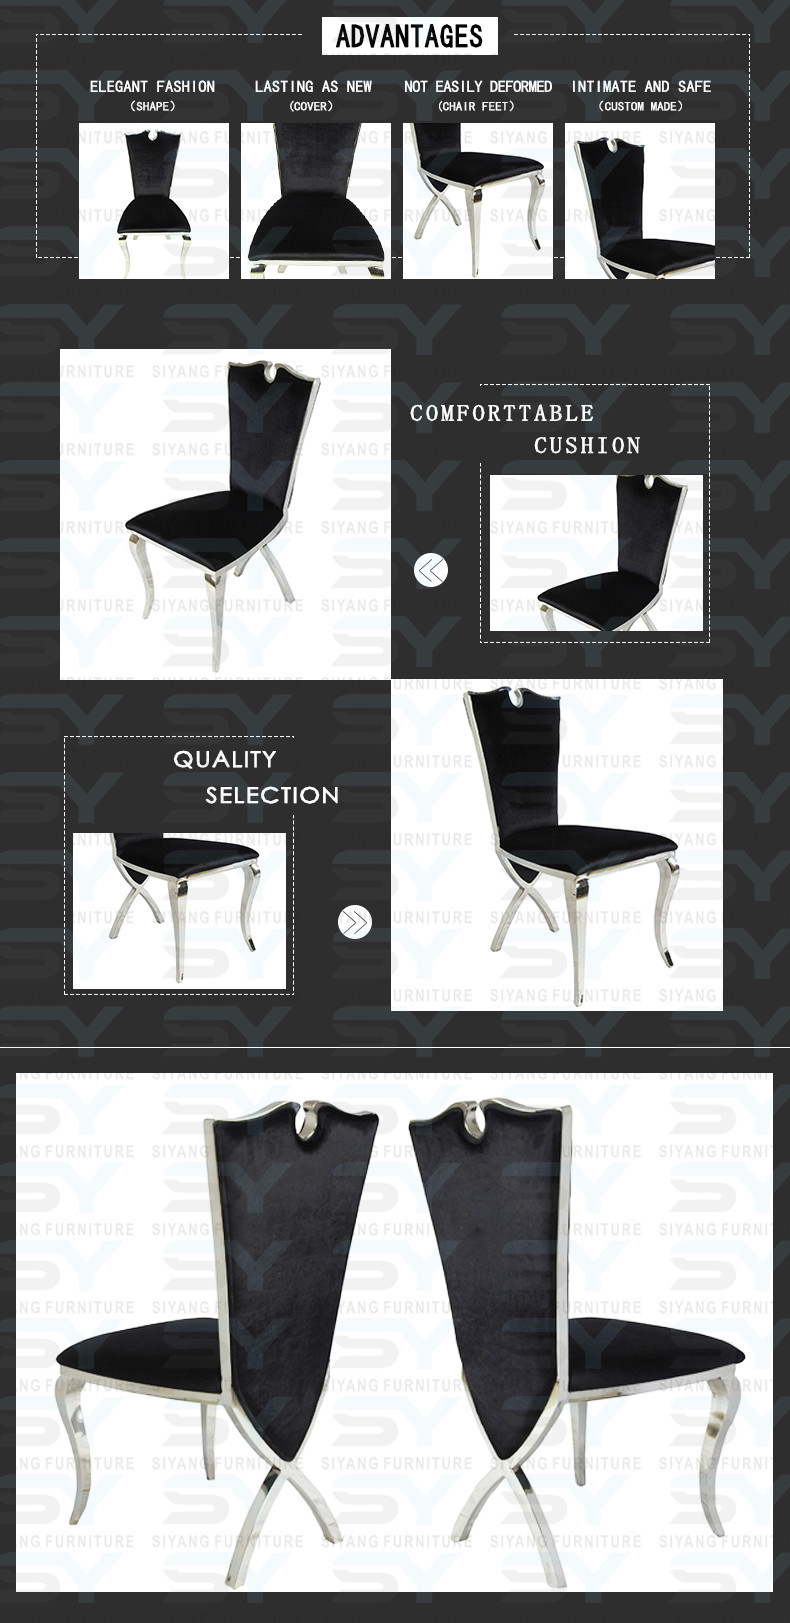 Hotel Furniture Steel Chair Commercial Restaurant Chair Dining Chair